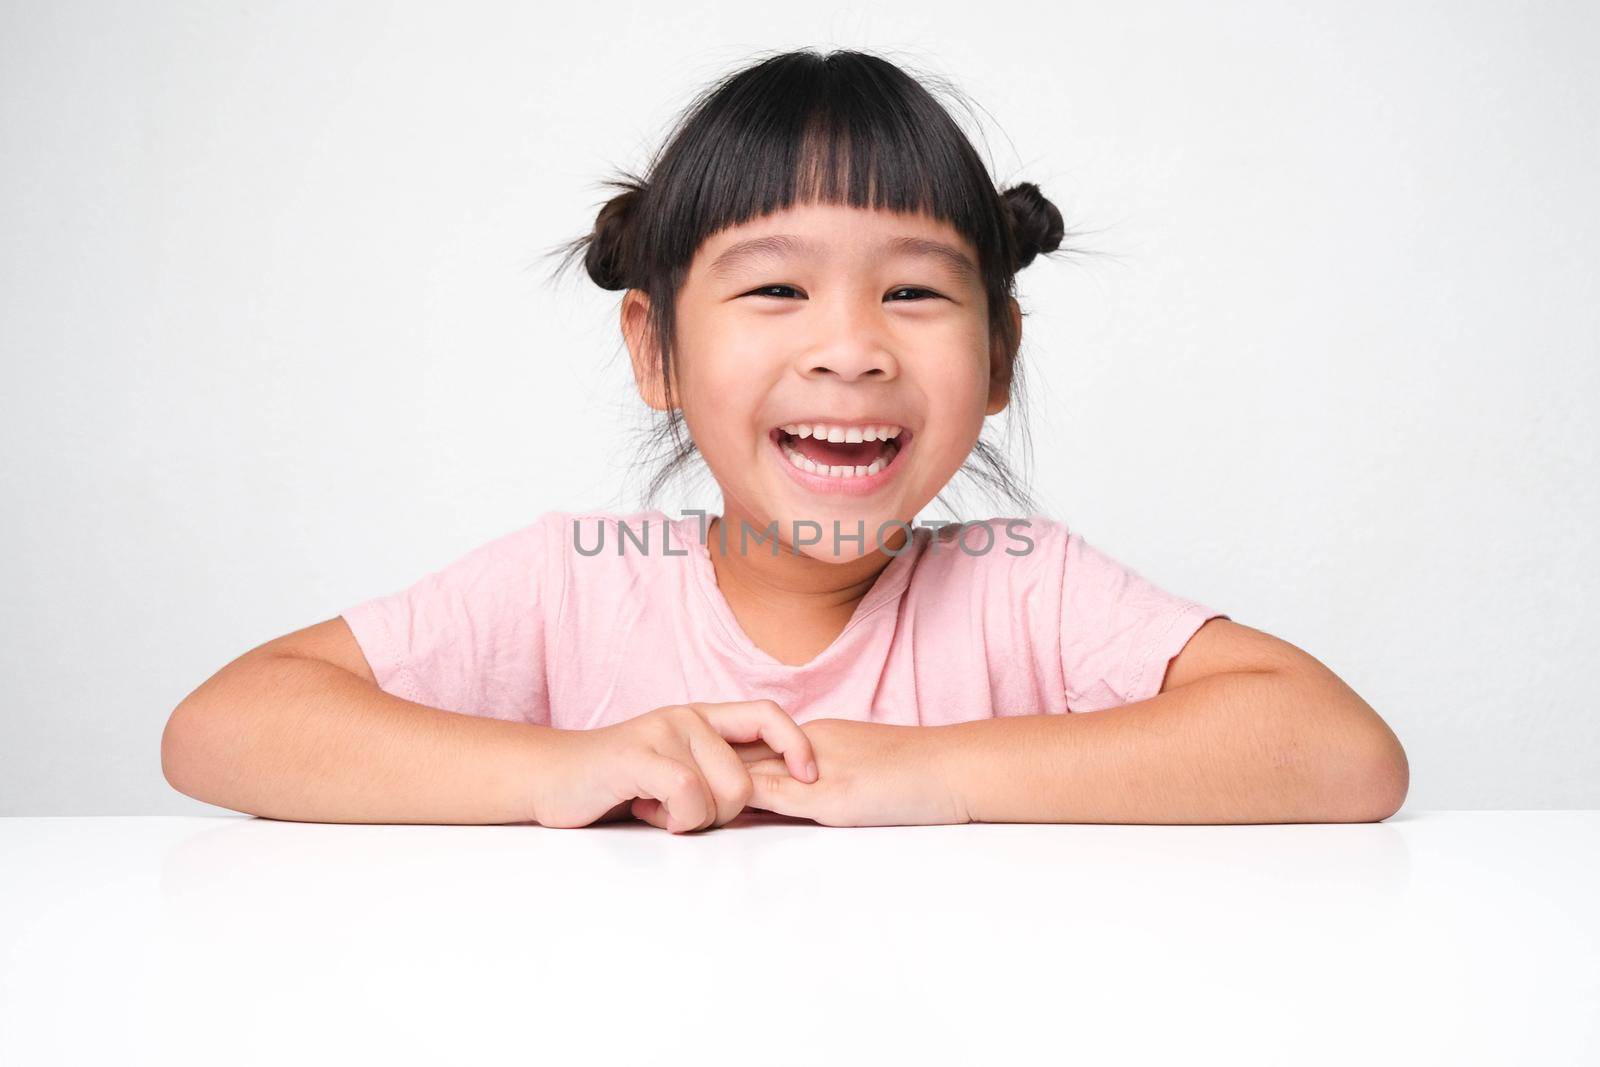 Cute dark haired girl smiling happily sitting at a table on a pink background and looking at the camera. Advertising childrens products